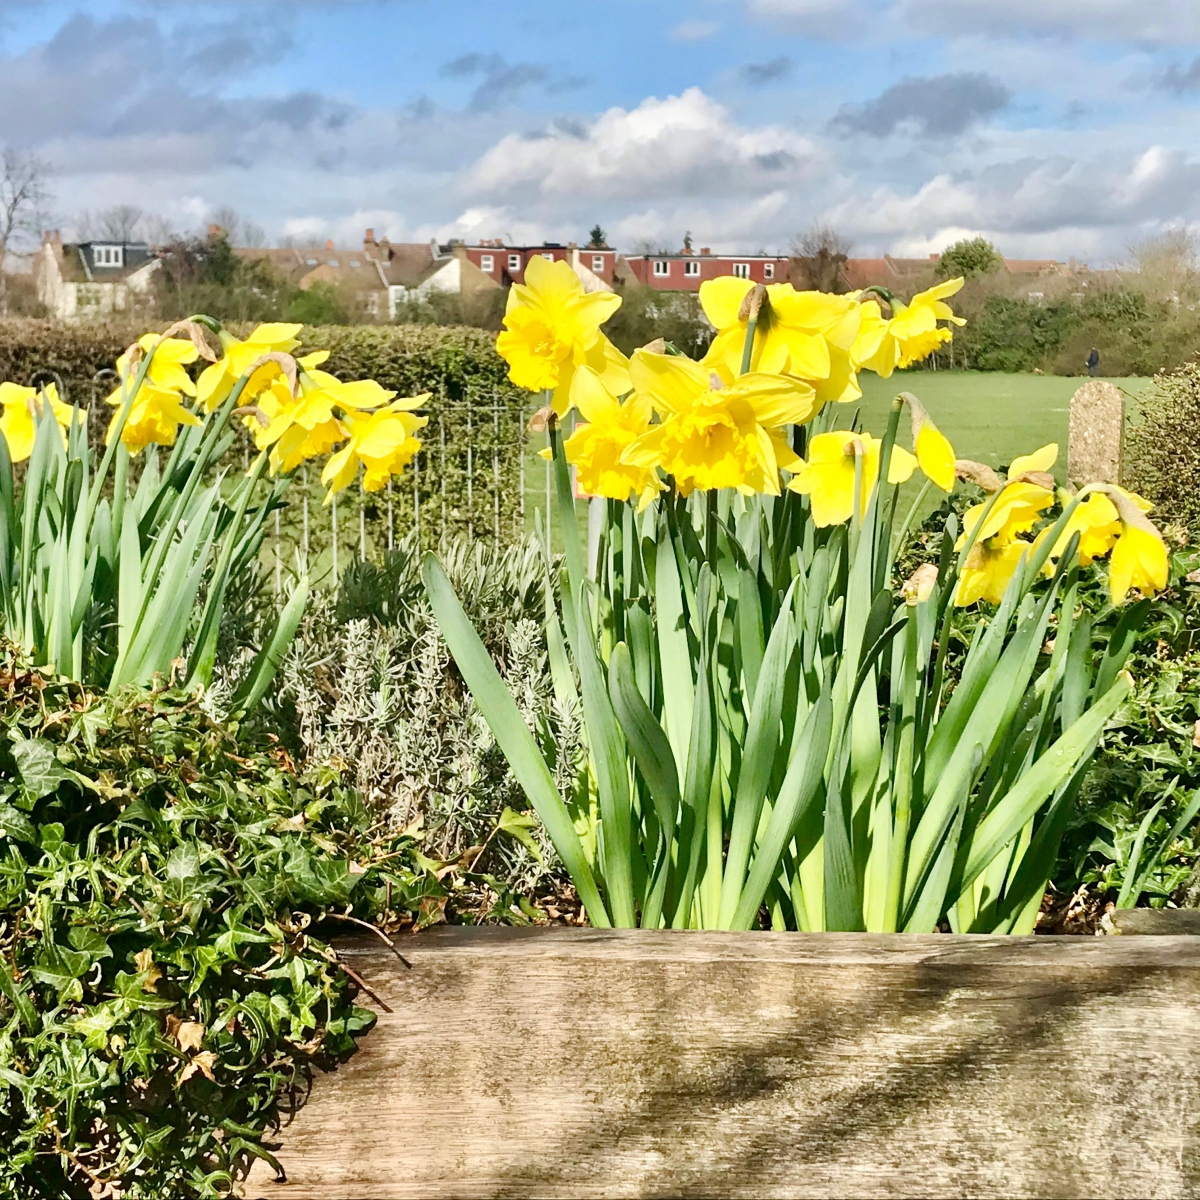 Daffodils in Spring 2021 in Colliers Wood Rec Planters